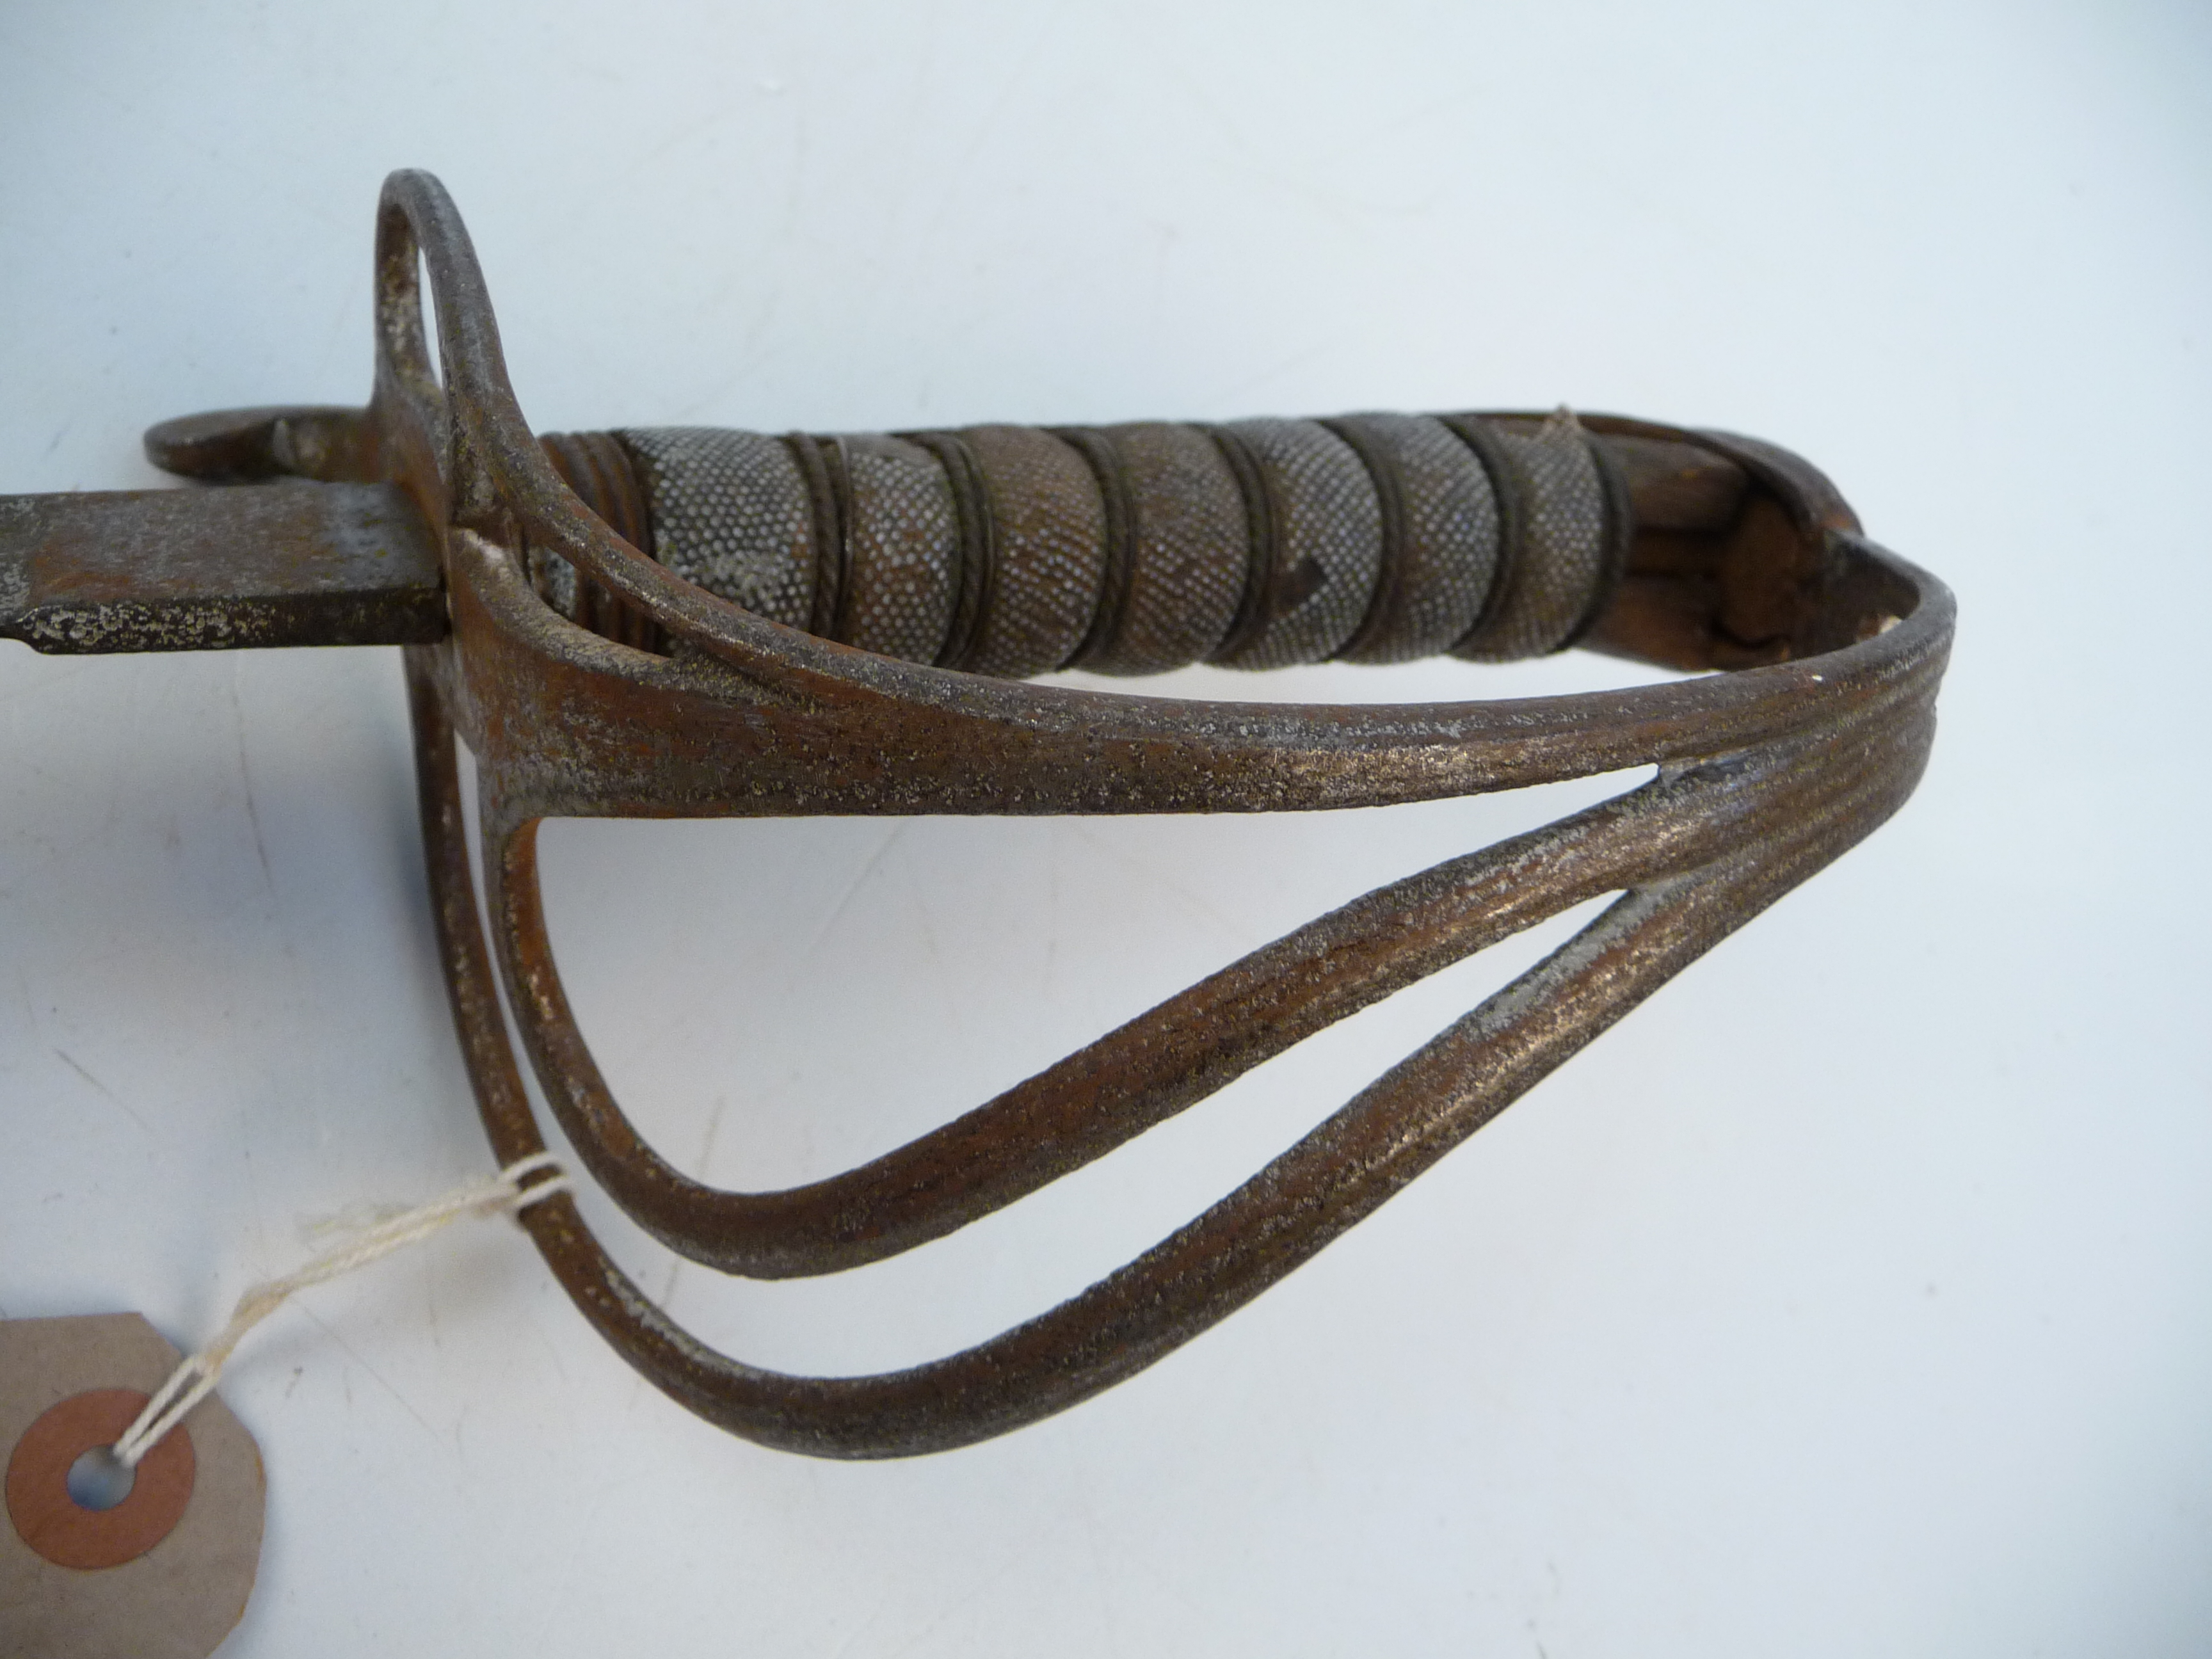 A 19th century naval sword with a basket guard and sharkskin wire bound grip, full length 95.5cm. - Image 3 of 5